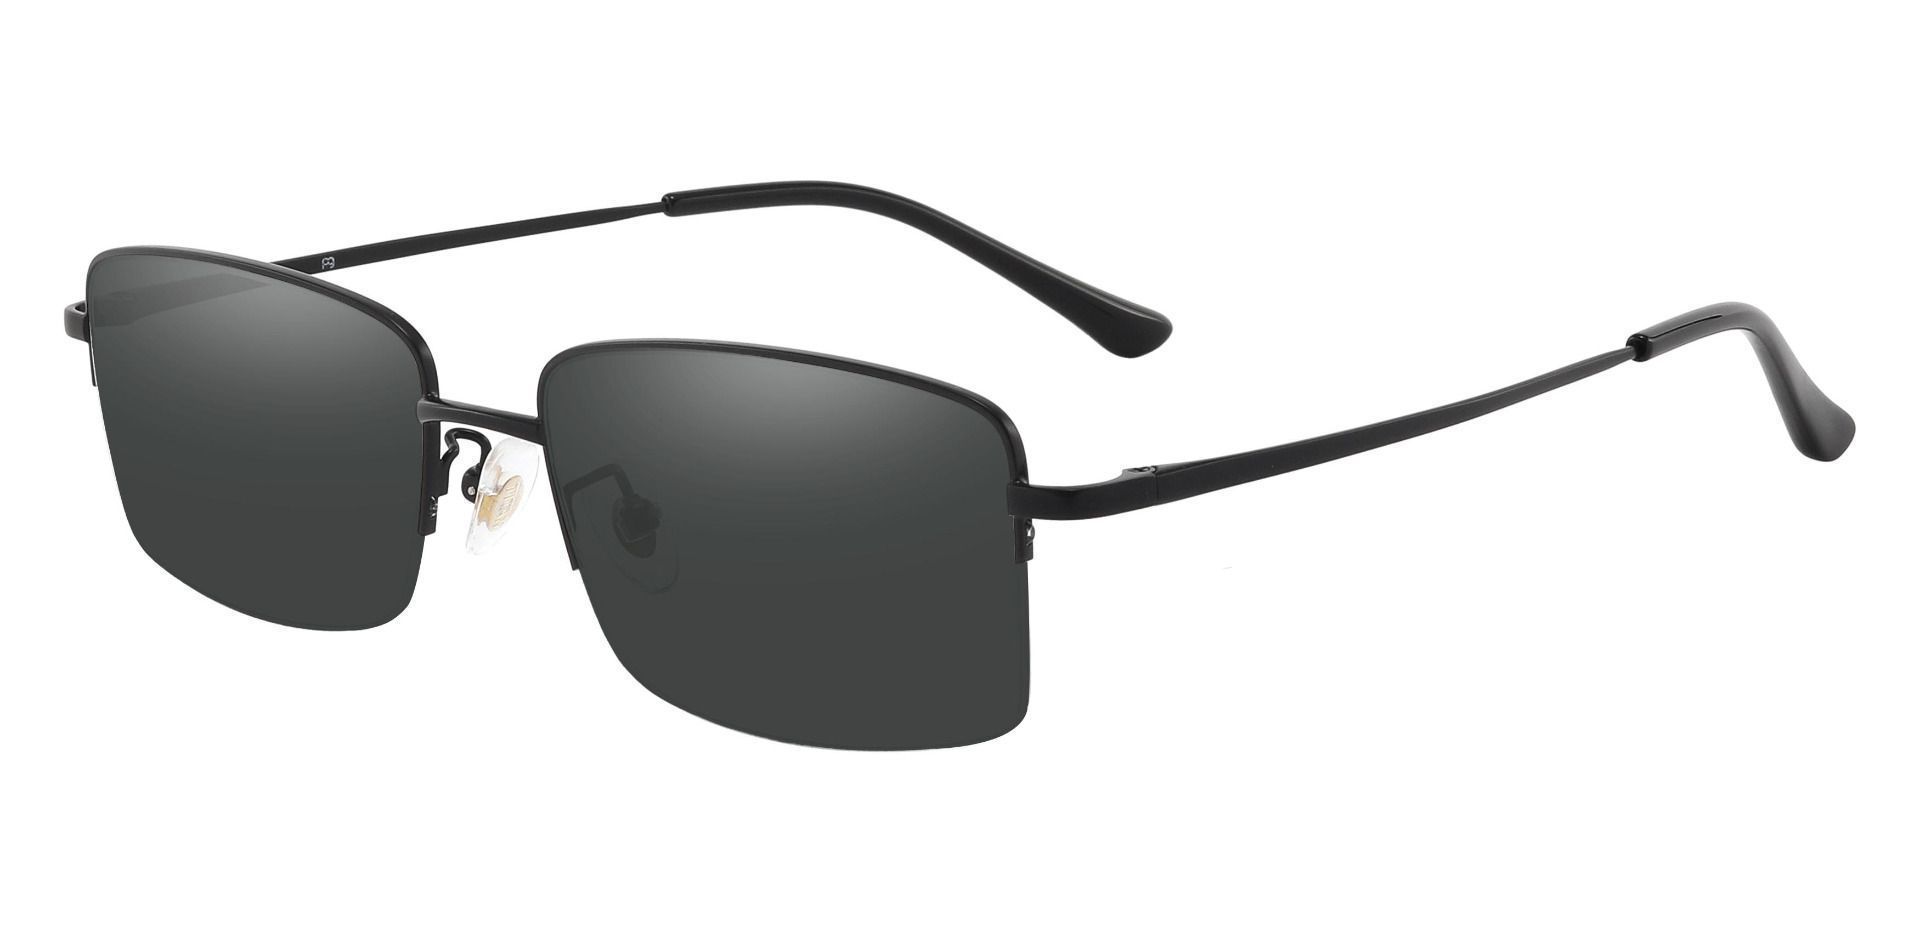 Bellmont Rectangle Non-Rx Sunglasses - Black Frame With Gray Lenses